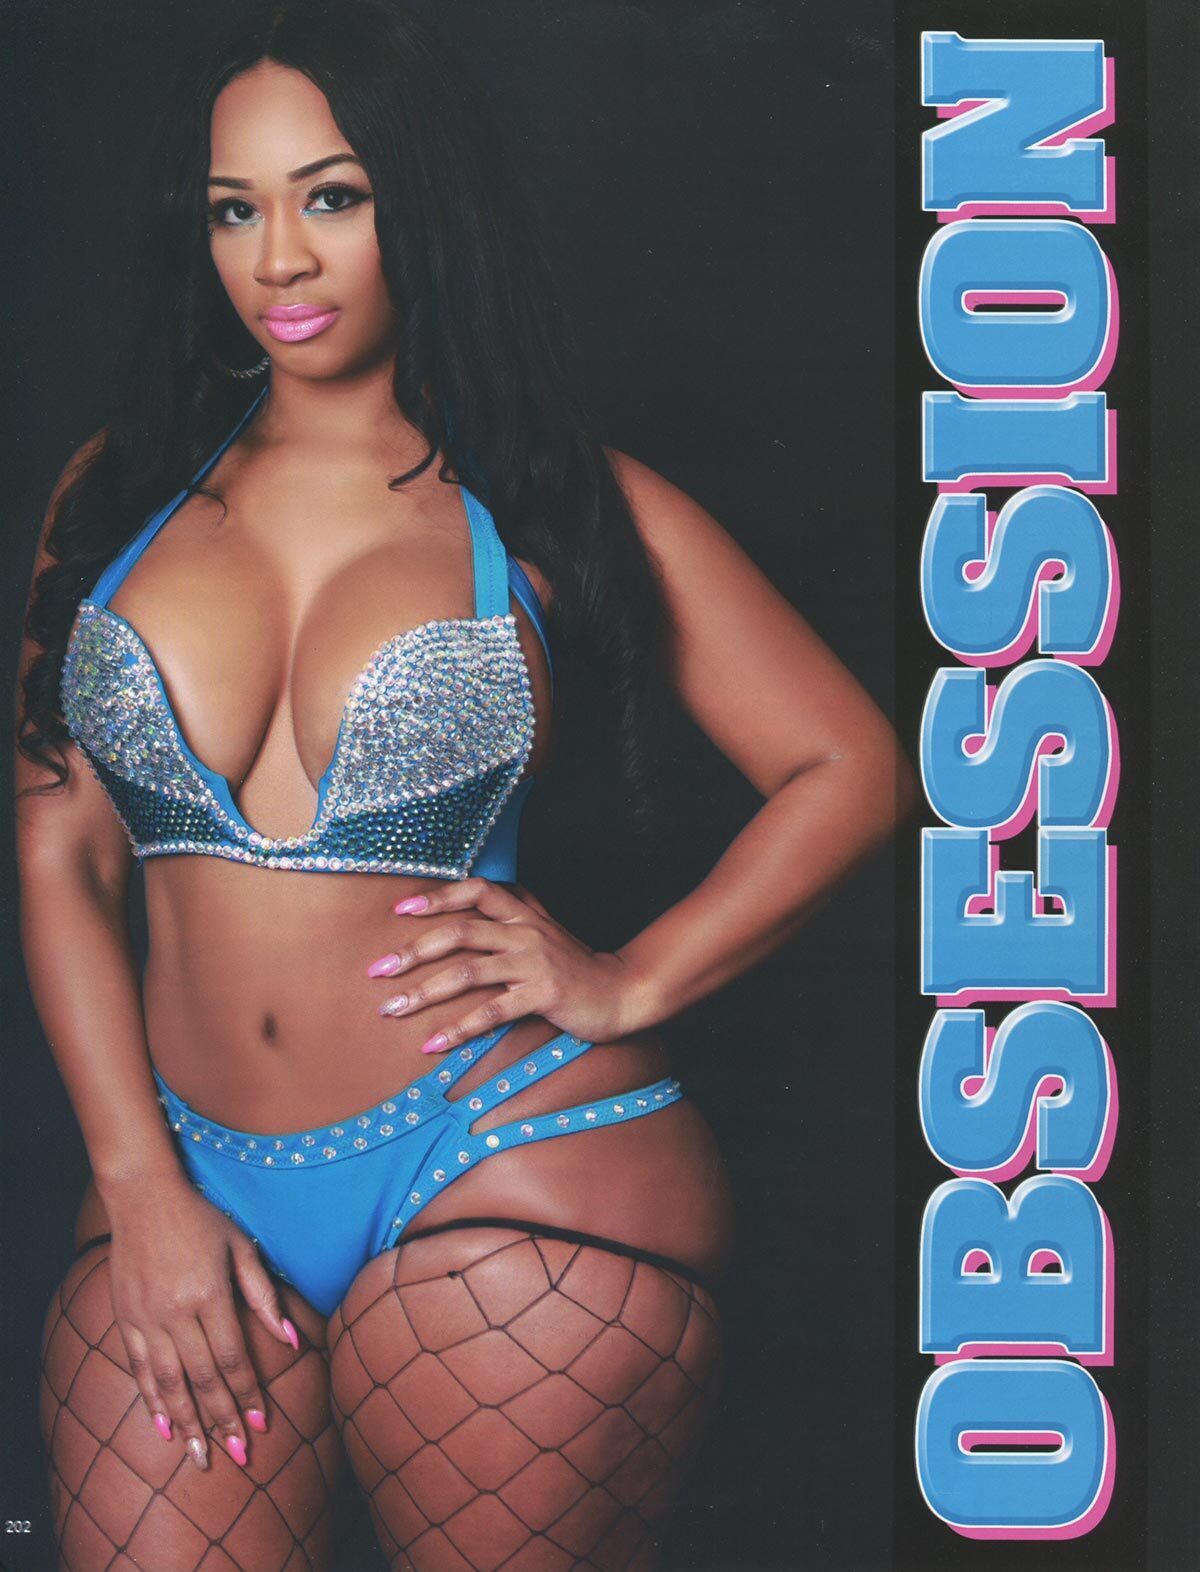 Adrienne Obsession Featured In Straight Stuntin Magazine pic